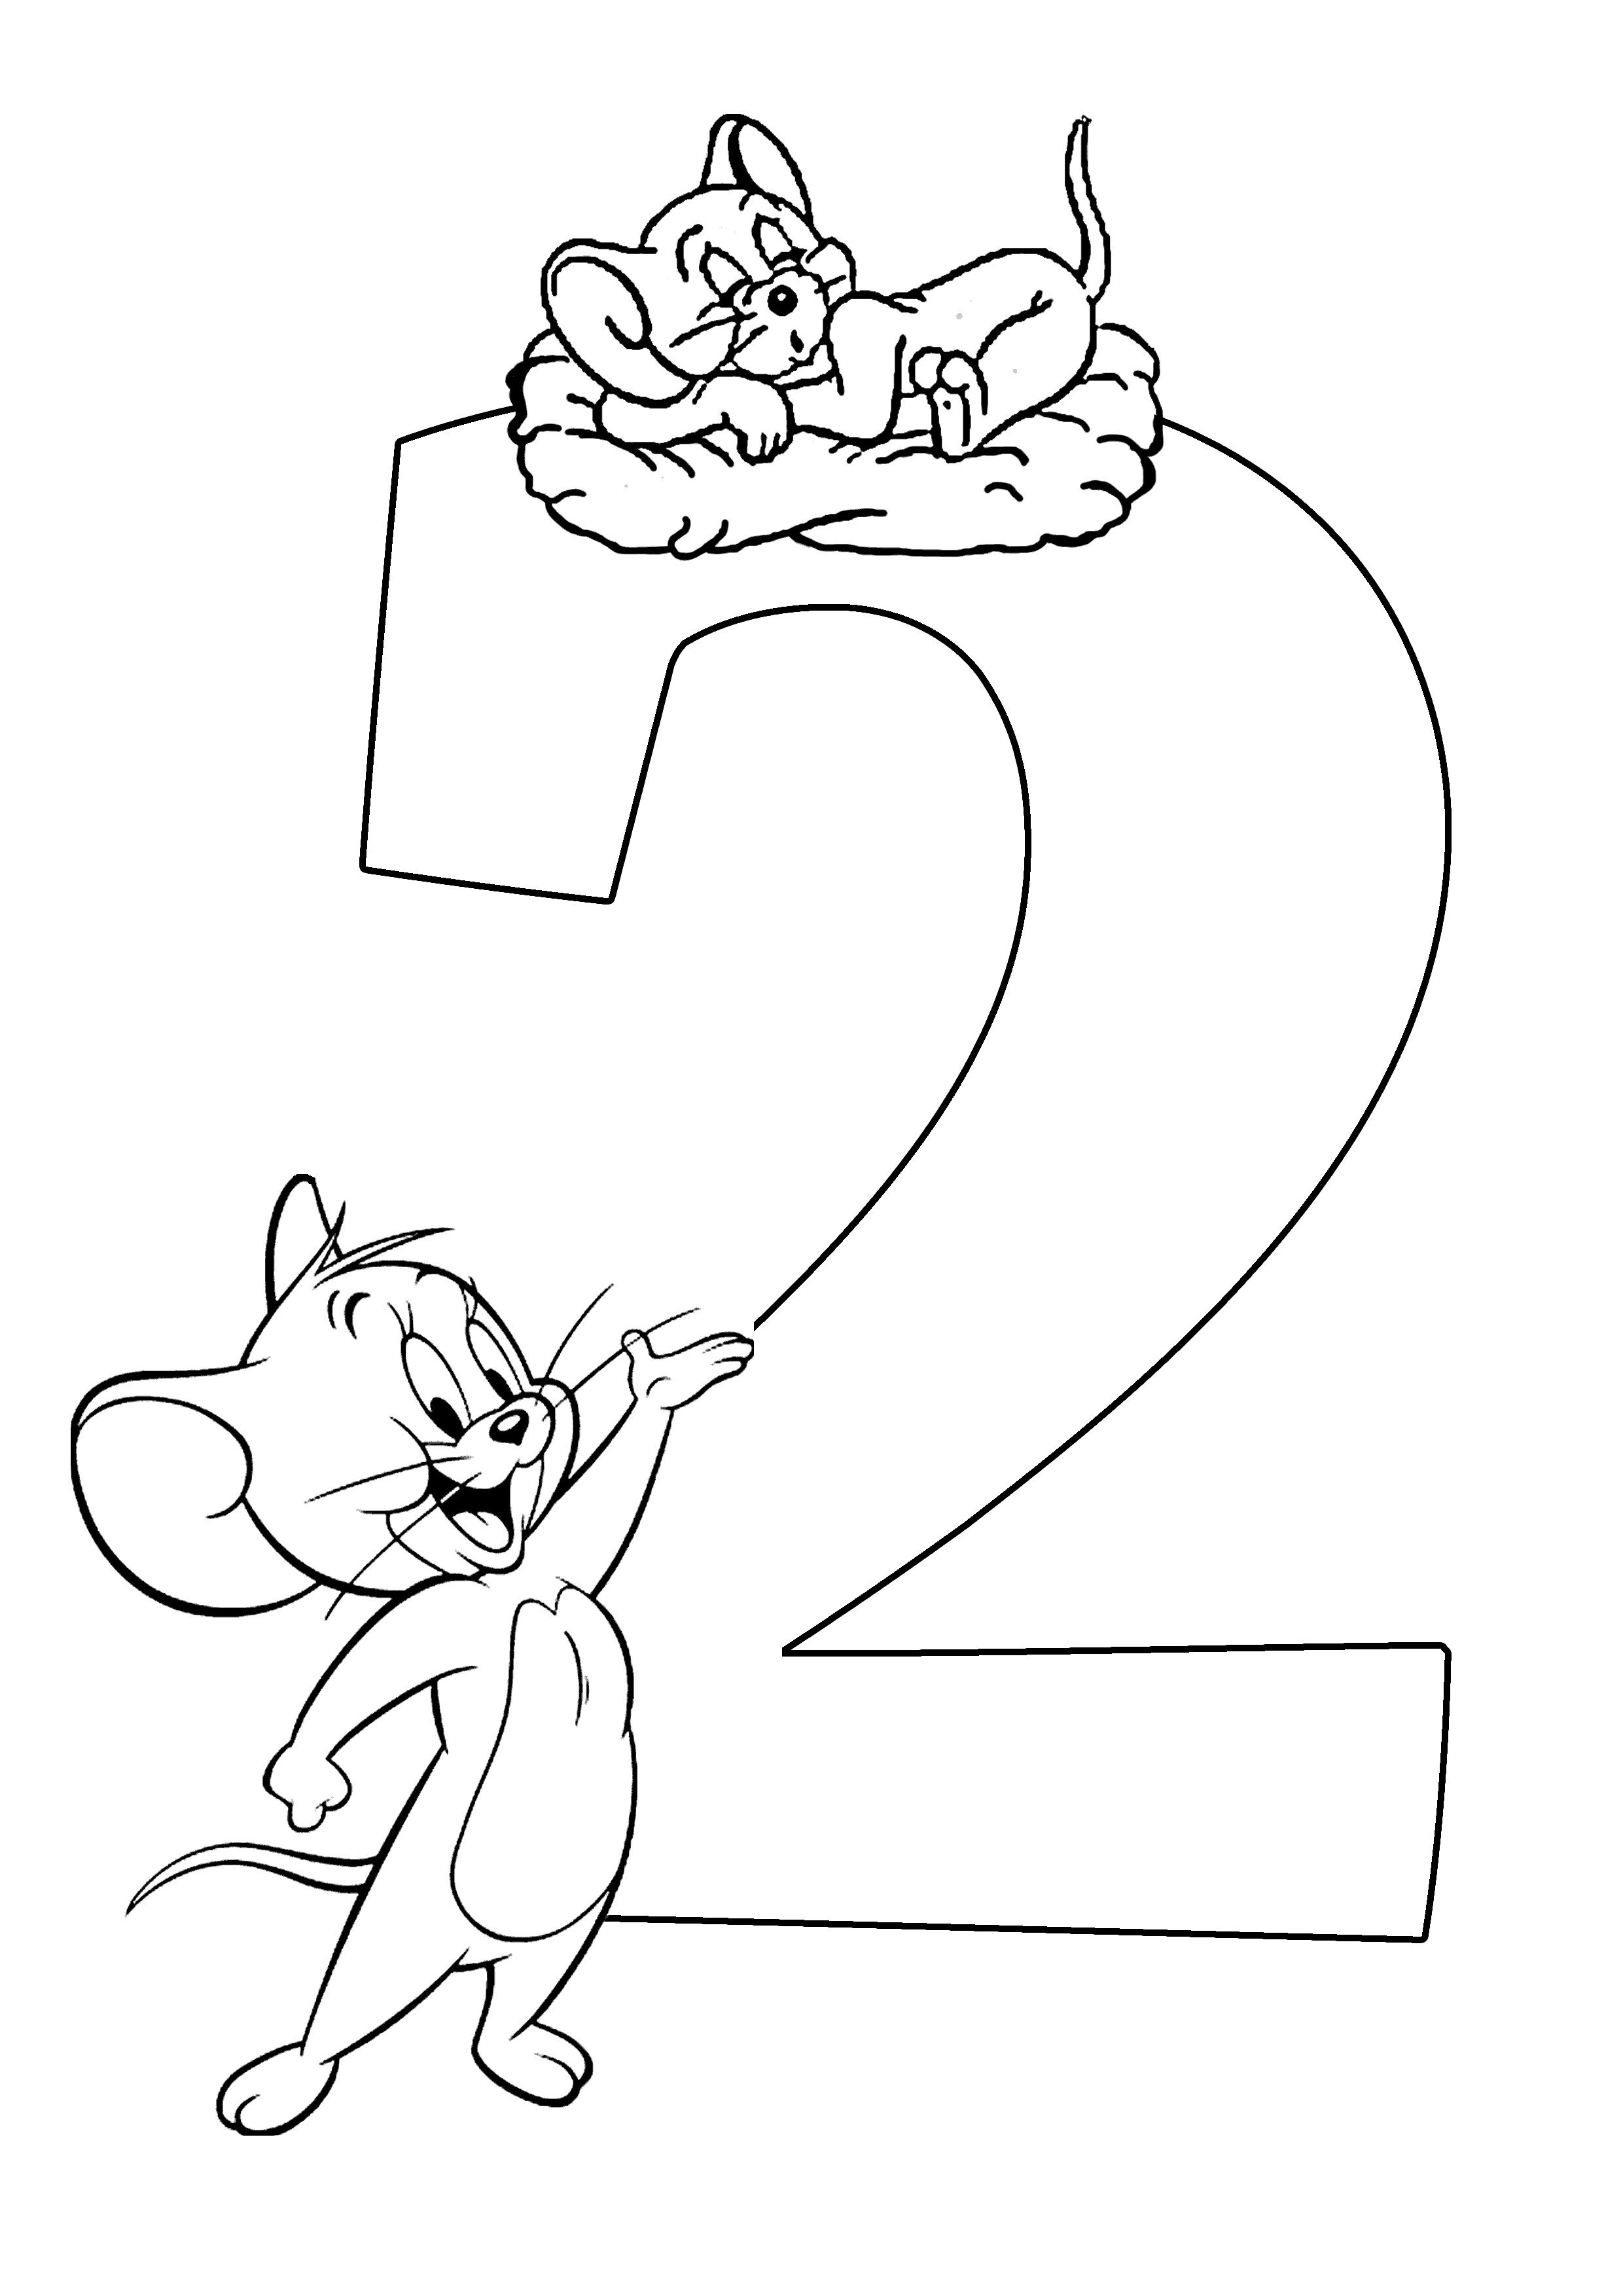 Number 23 Coloring Page